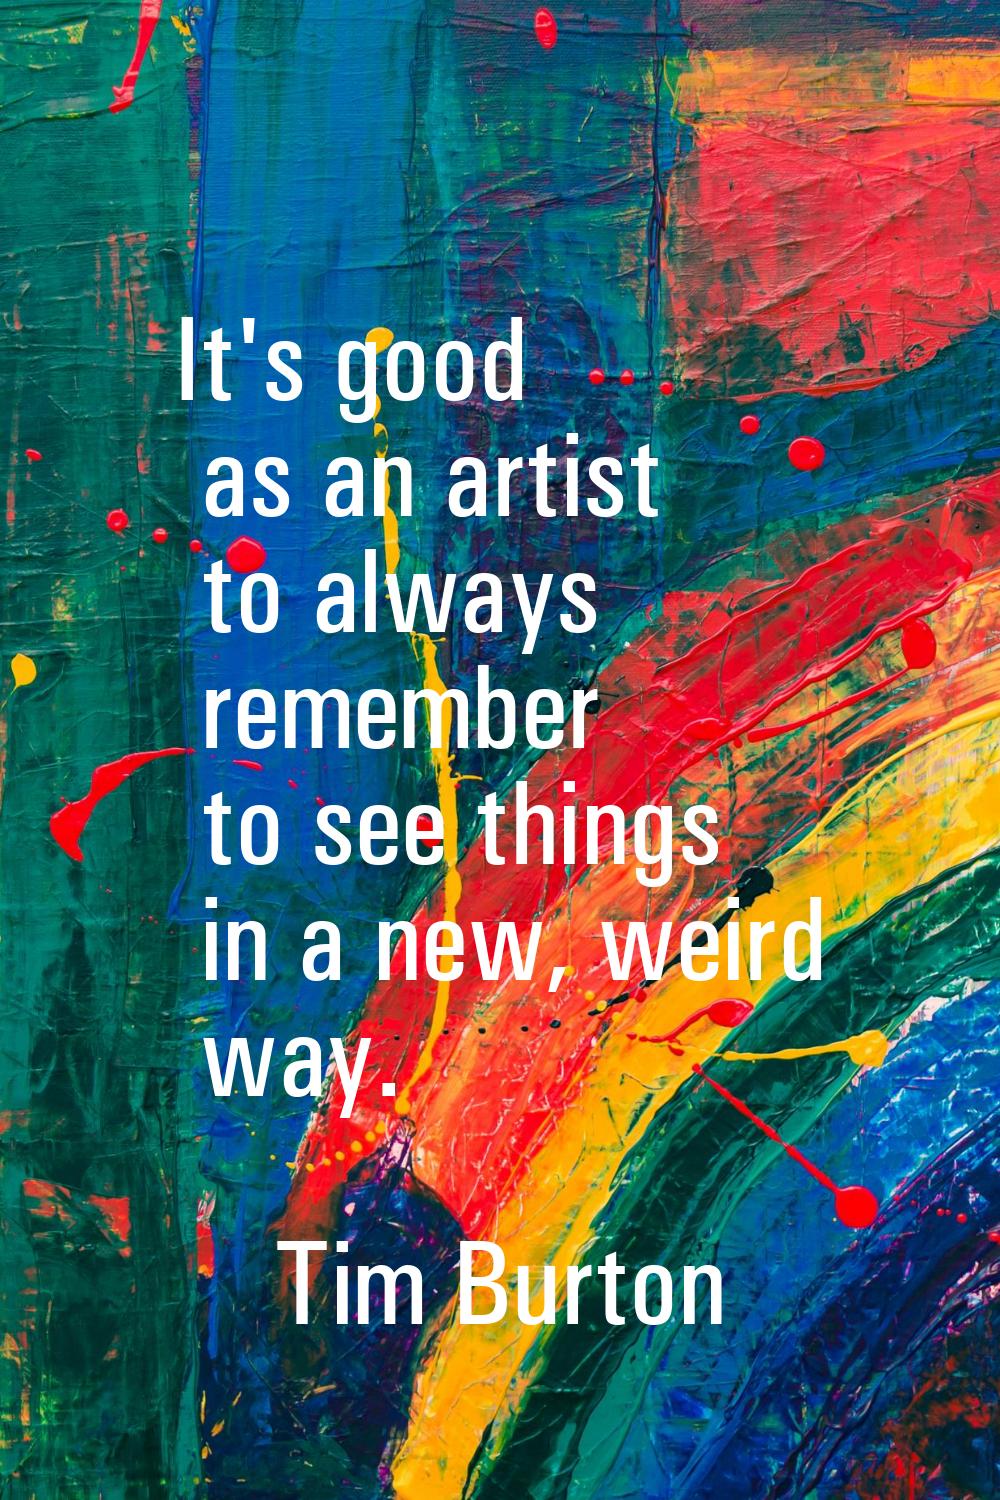 It's good as an artist to always remember to see things in a new, weird way.